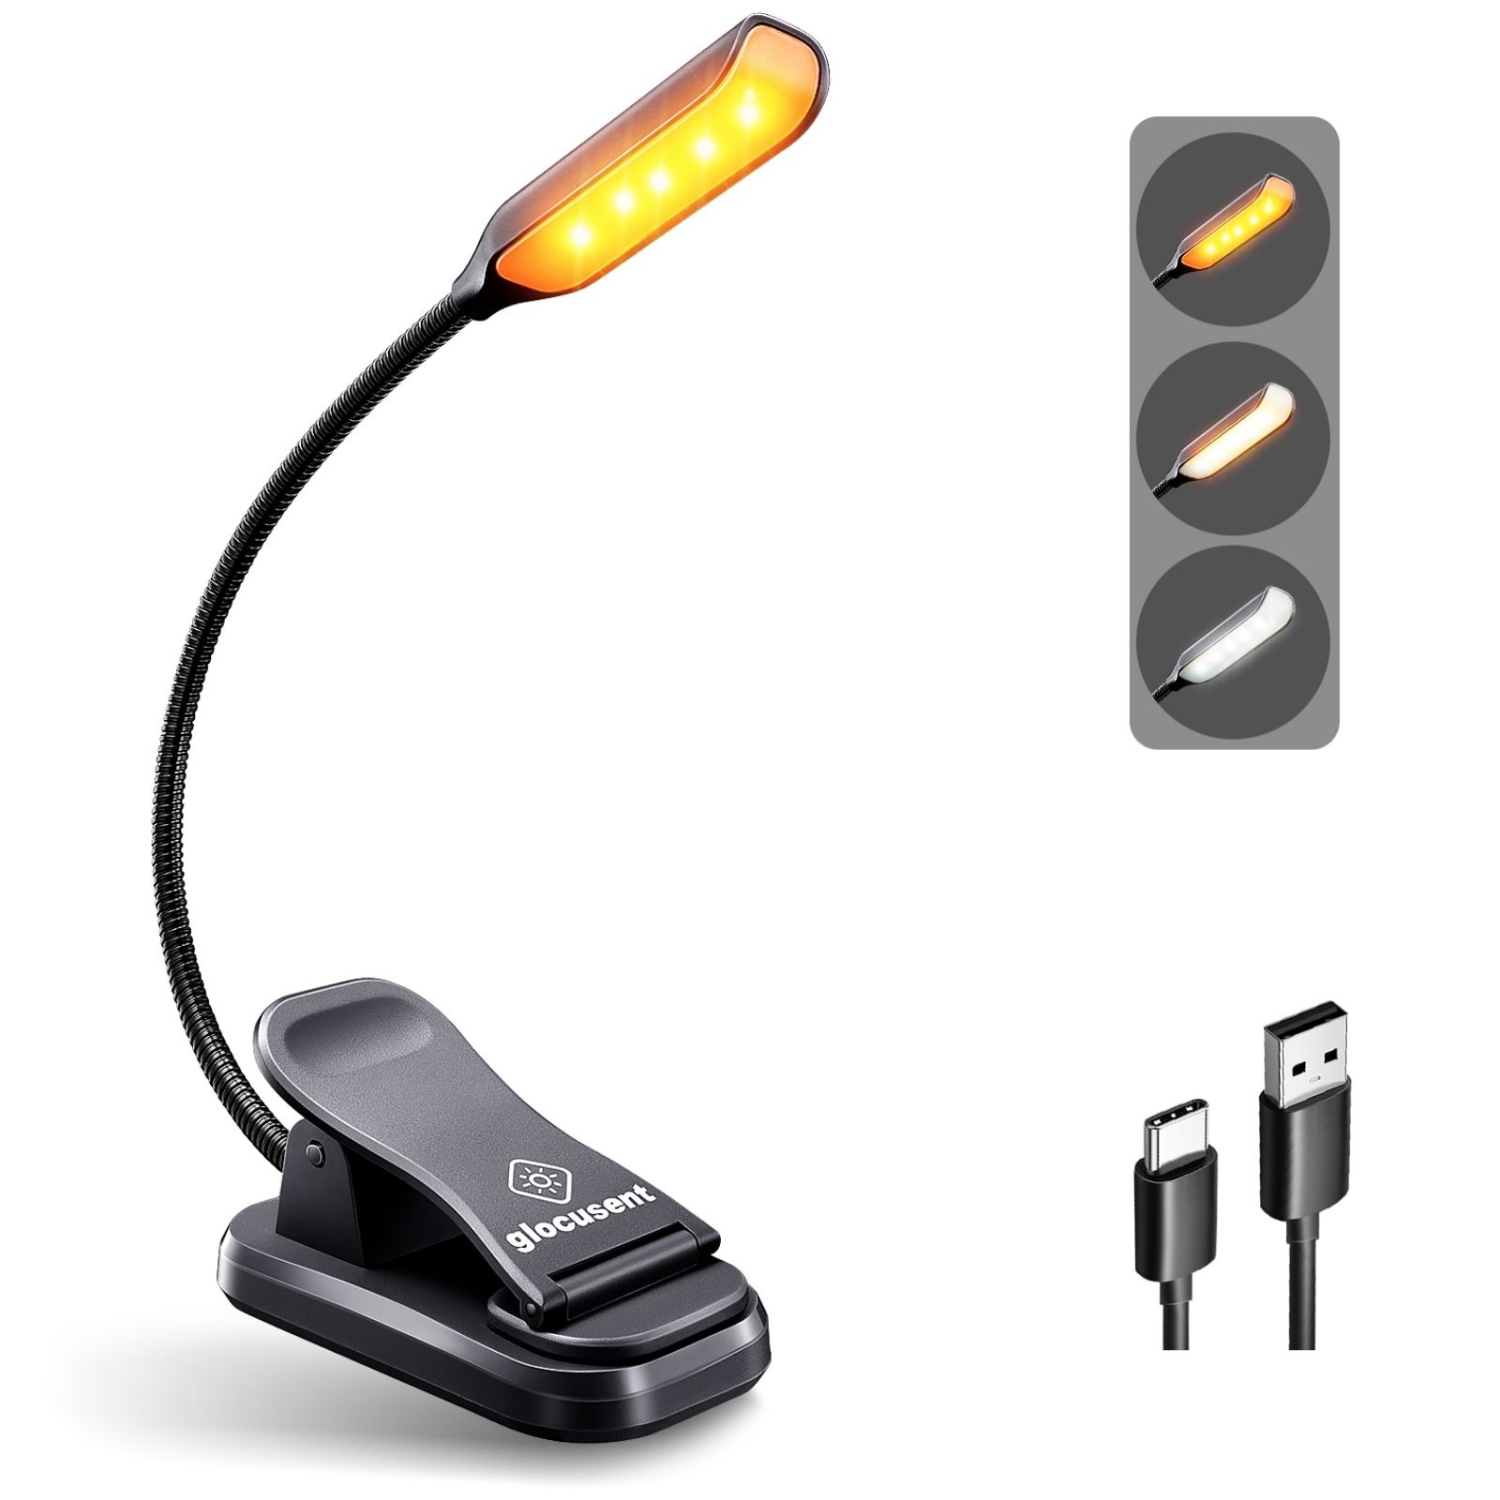 Glocusent Lightweight Rechargeable 10 LED Amber Book Light for Reading in Bed, Clip-on EyeCare Warm Reading Light up to 80Hrs, 3 Brightness Dimmable X 3 Color Modes, Perfect for Readers & Kids - Black